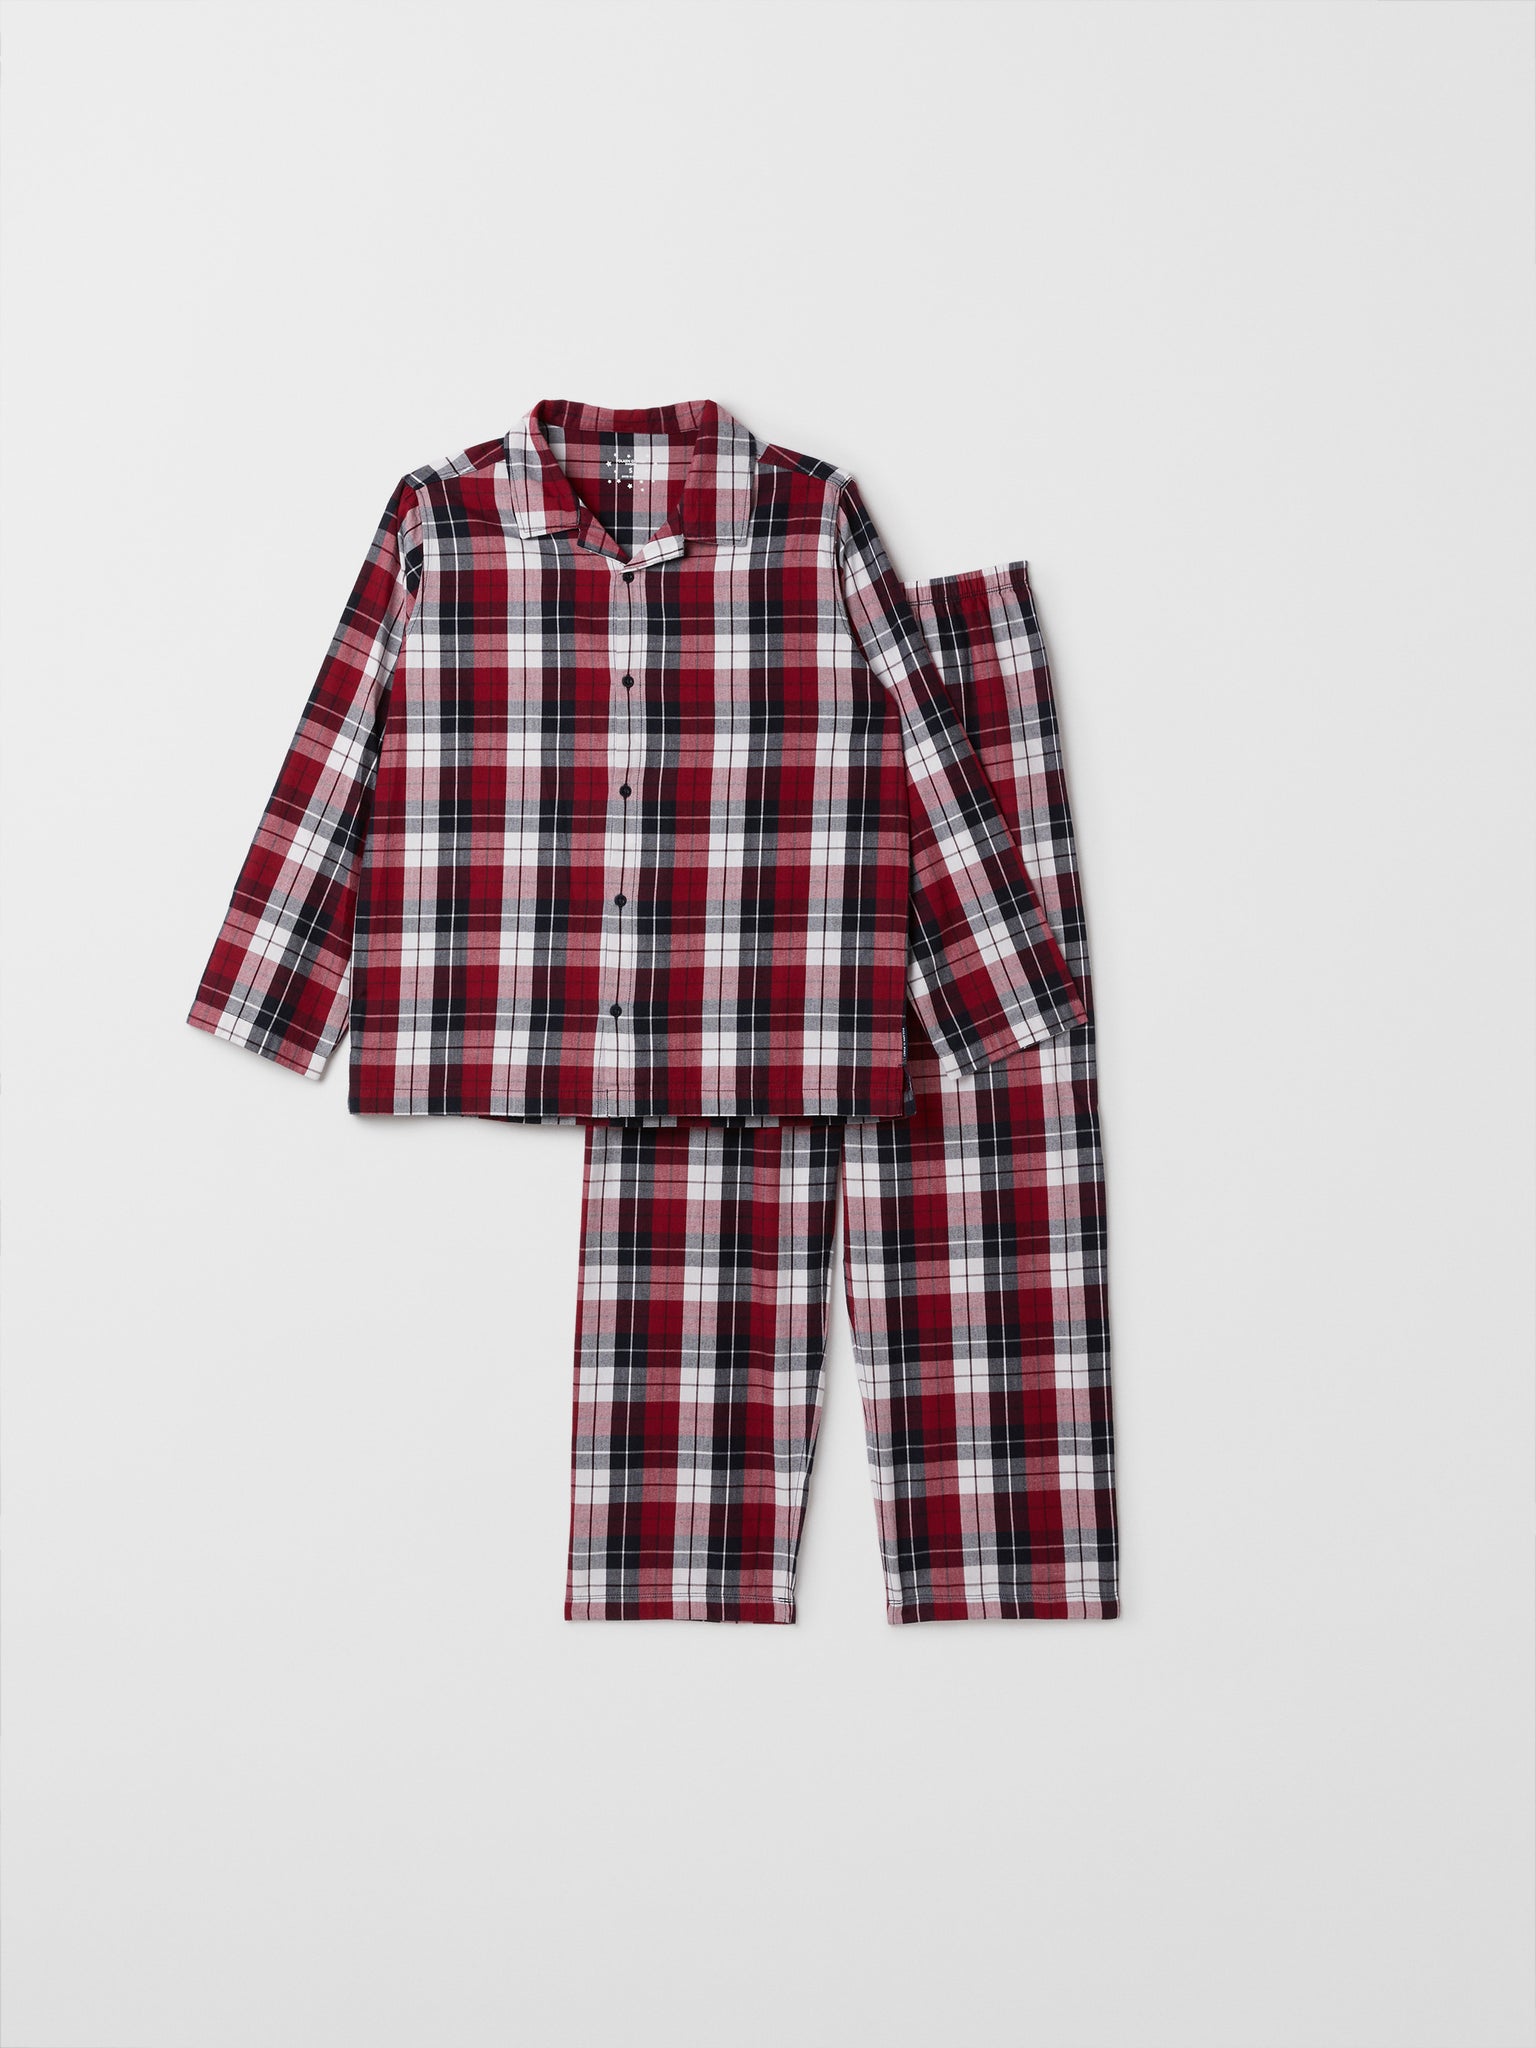 Checked Cotton Adult Pyjamas from the Polarn O. Pyret adult collection. Clothes made using sustainably sourced materials.